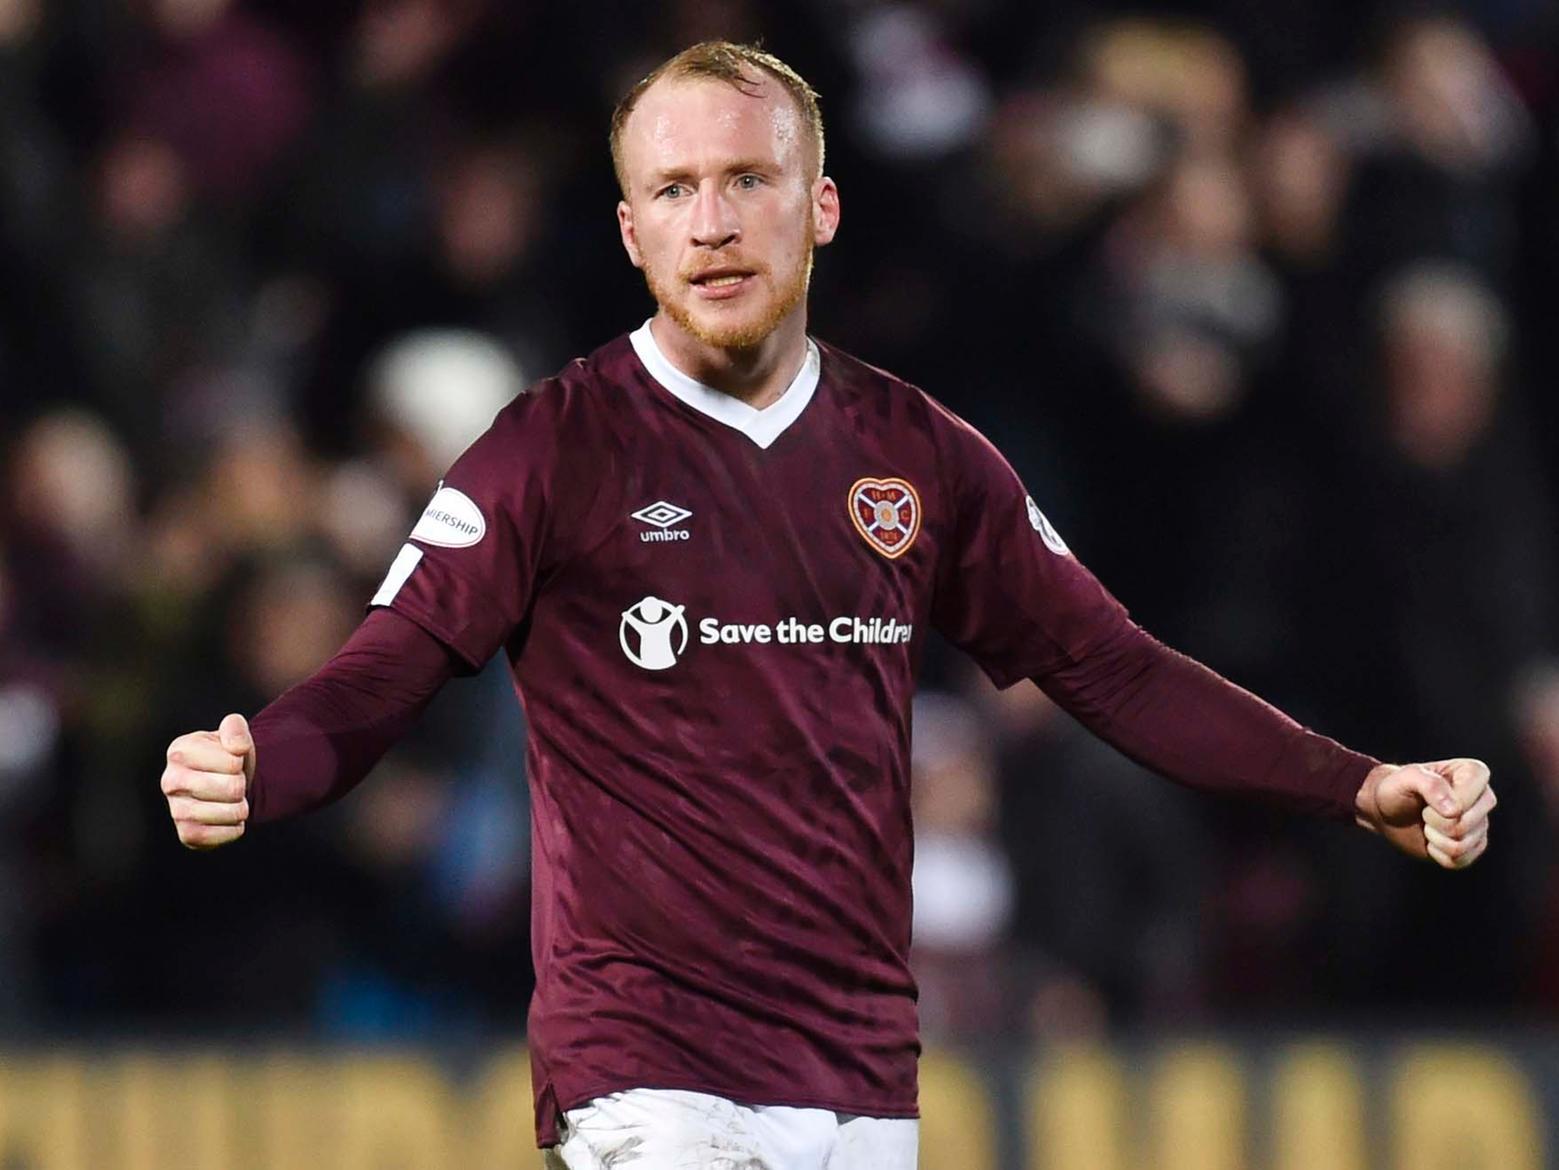 Hearts best attacking player. He scored, showed some nice touches and, even in the second half where his performance dipped, continued to win fouls.